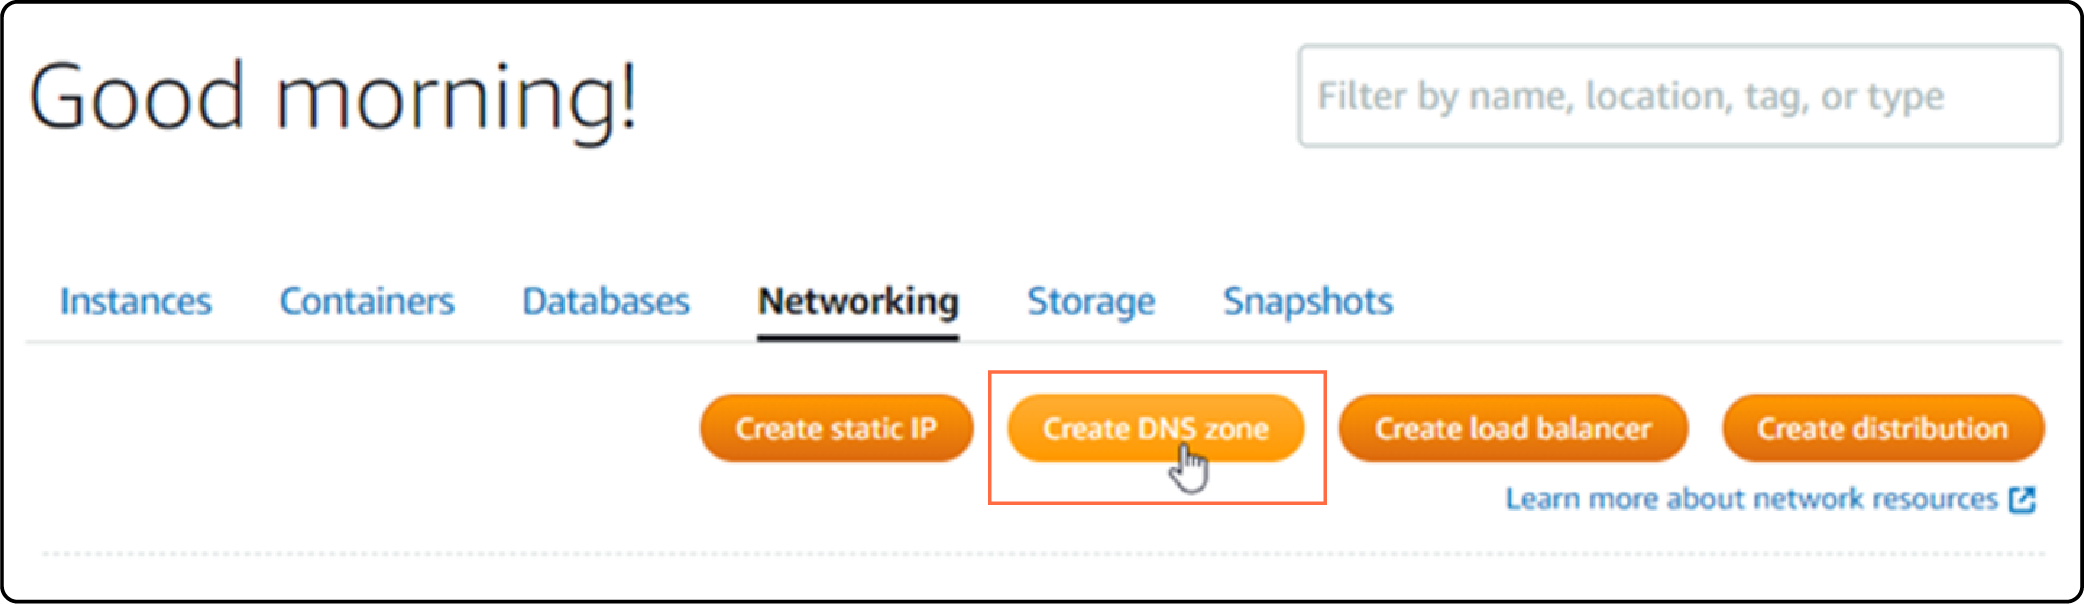 Create DNS zone for Magento domain on AWS Lightsail